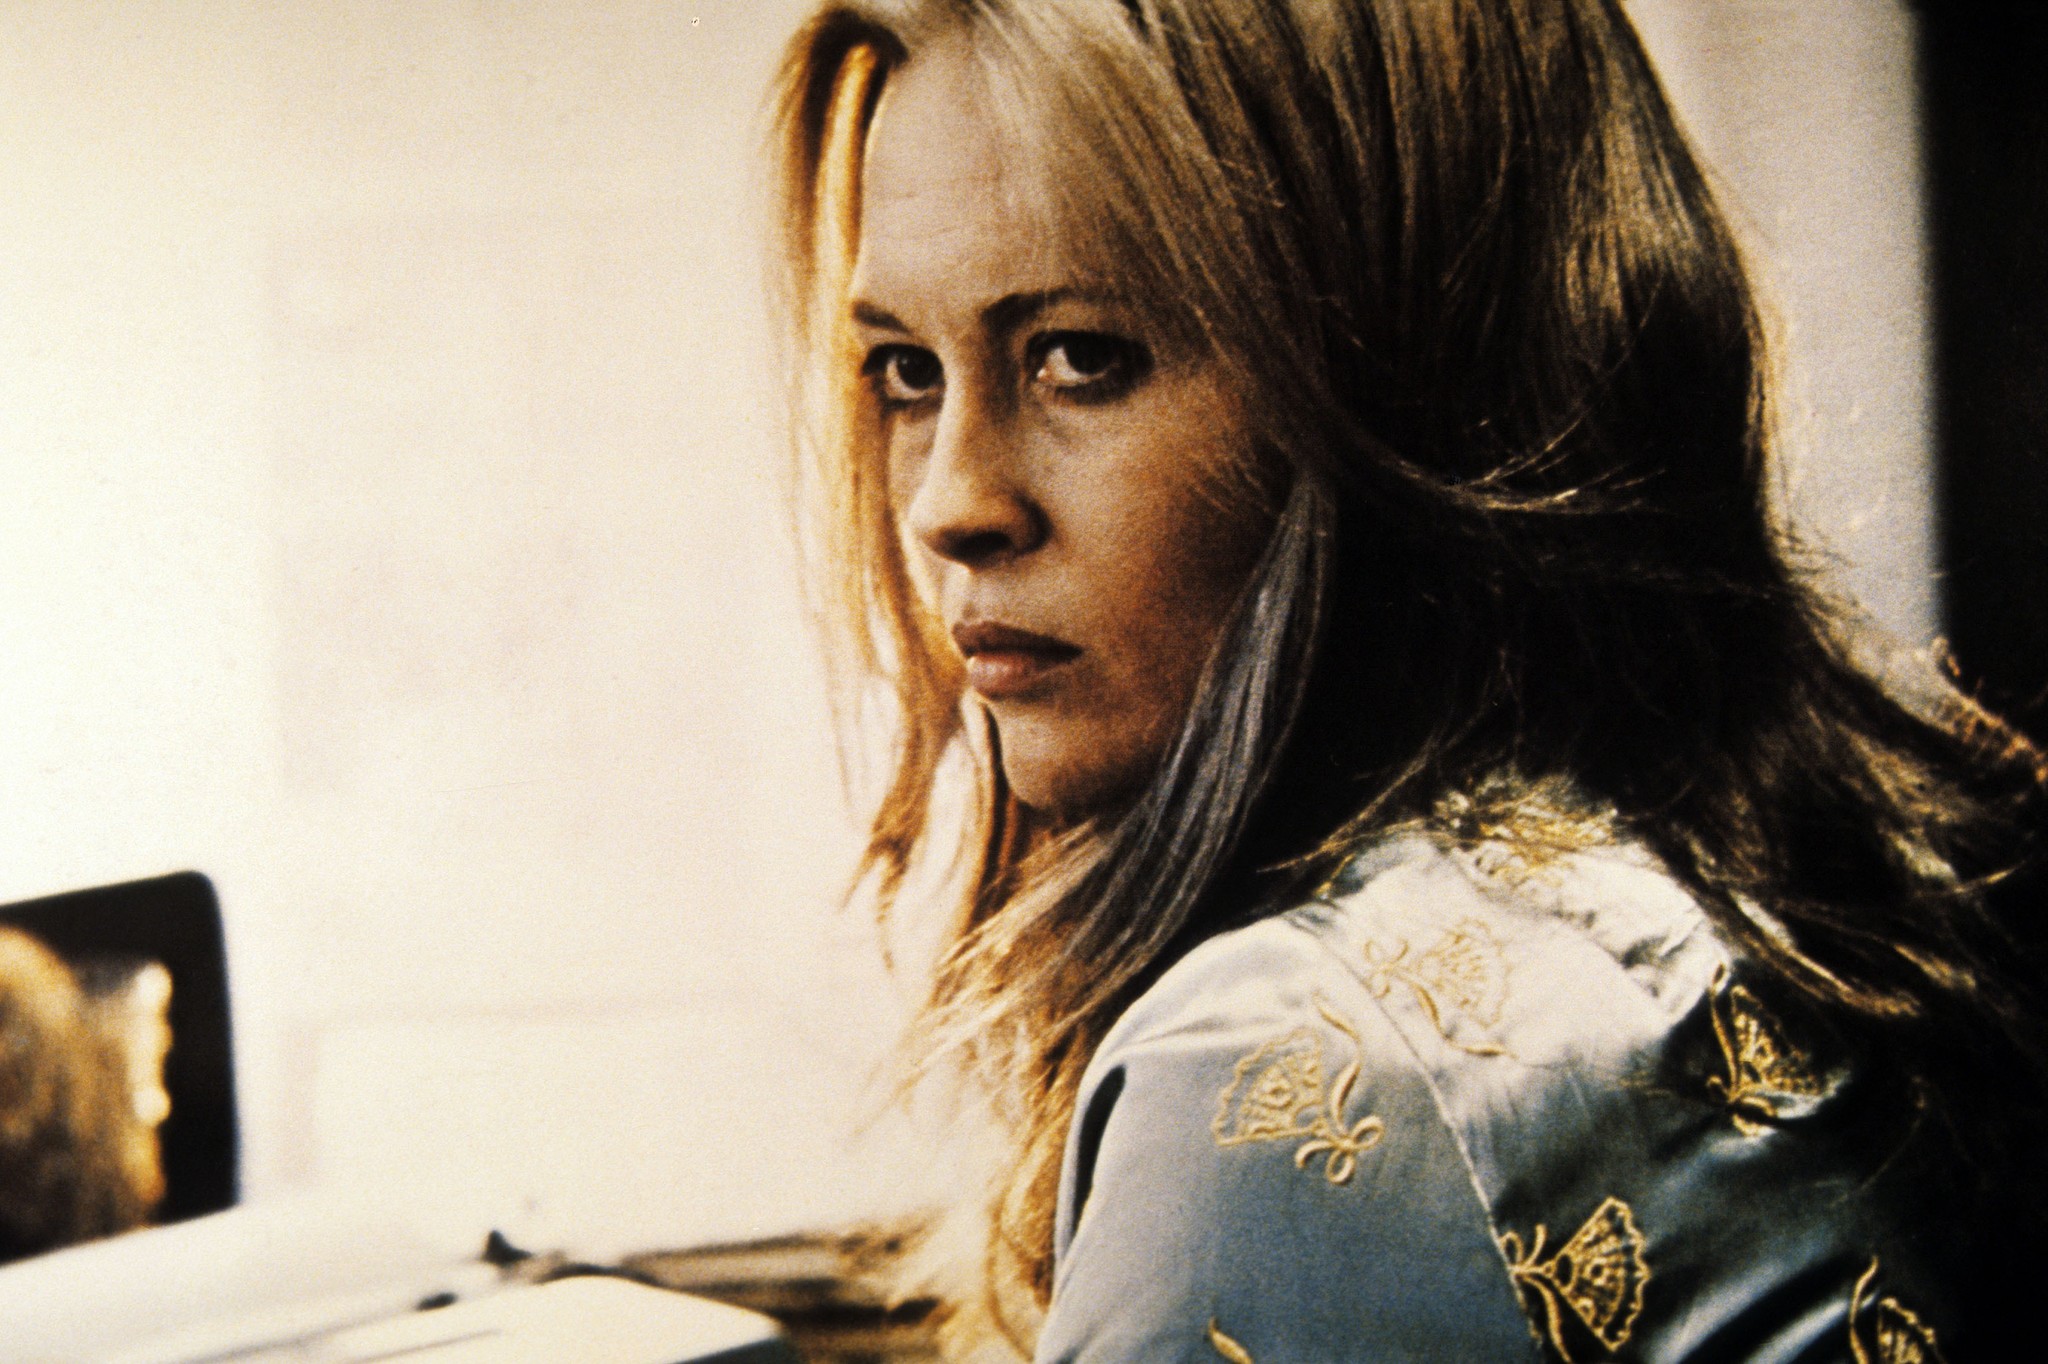 Puzzle of a Downfall Child (1970) Screenshot 2 